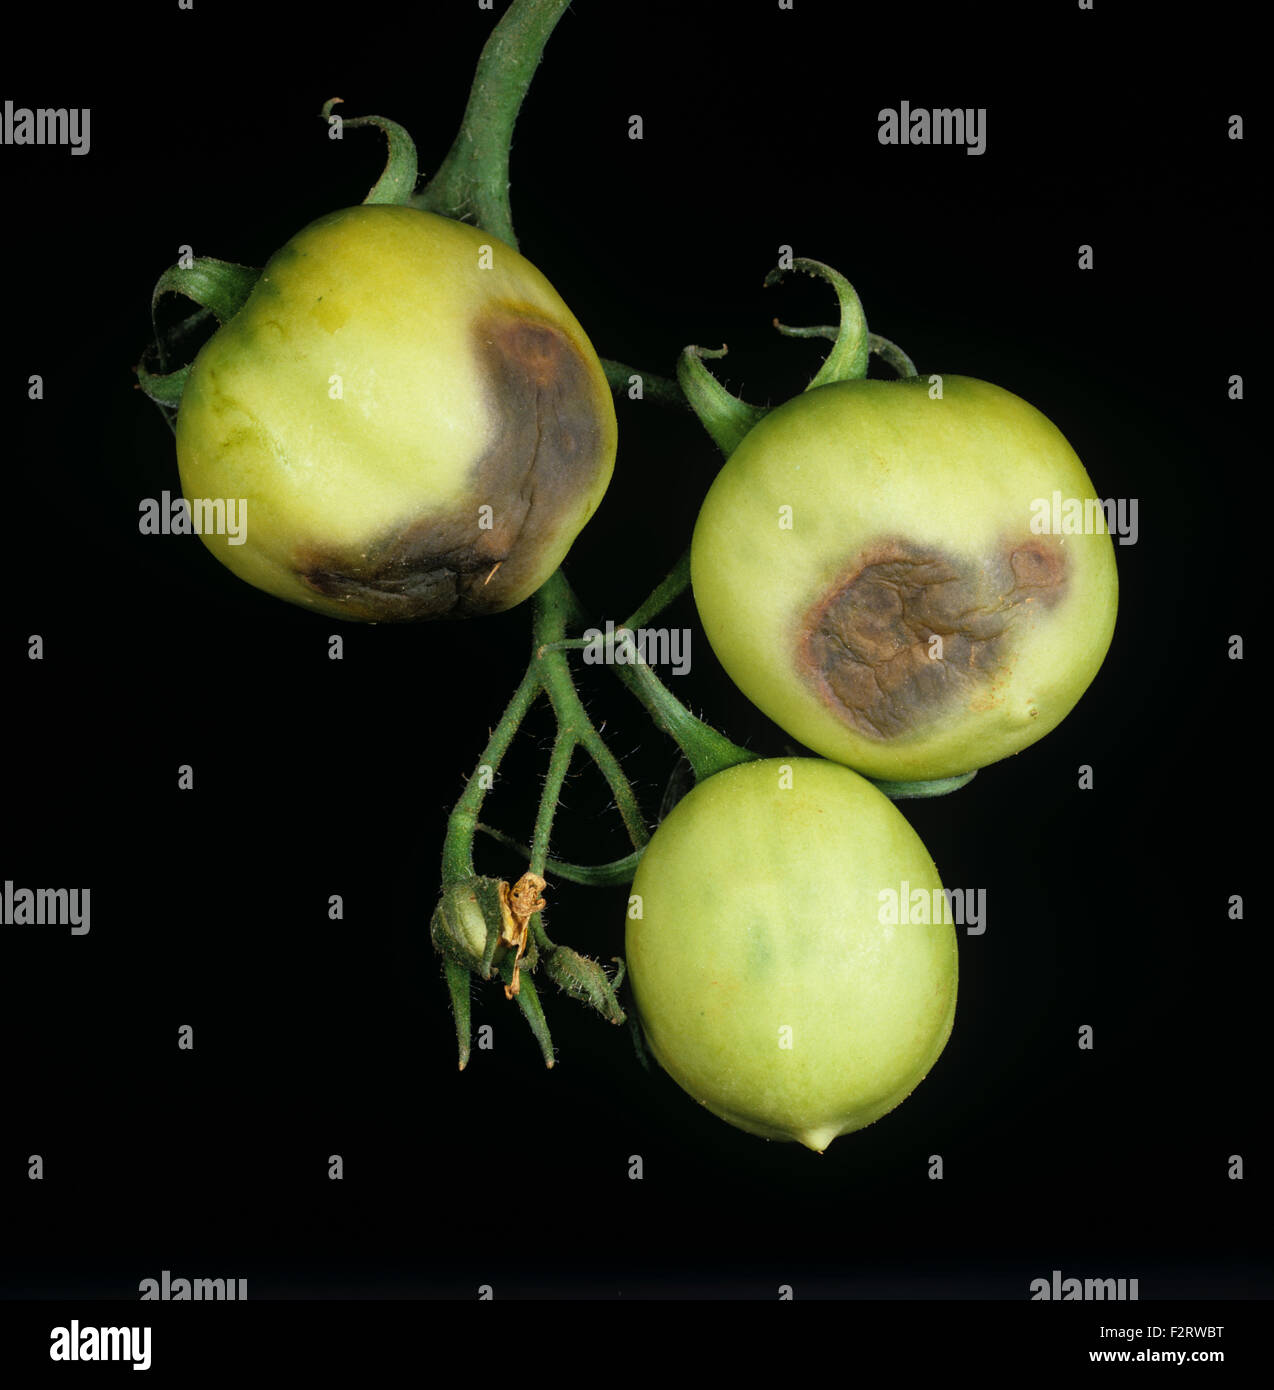 Late blight, Phytophthora infestans, lesions on green tomato fruit, Thailand Stock Photo